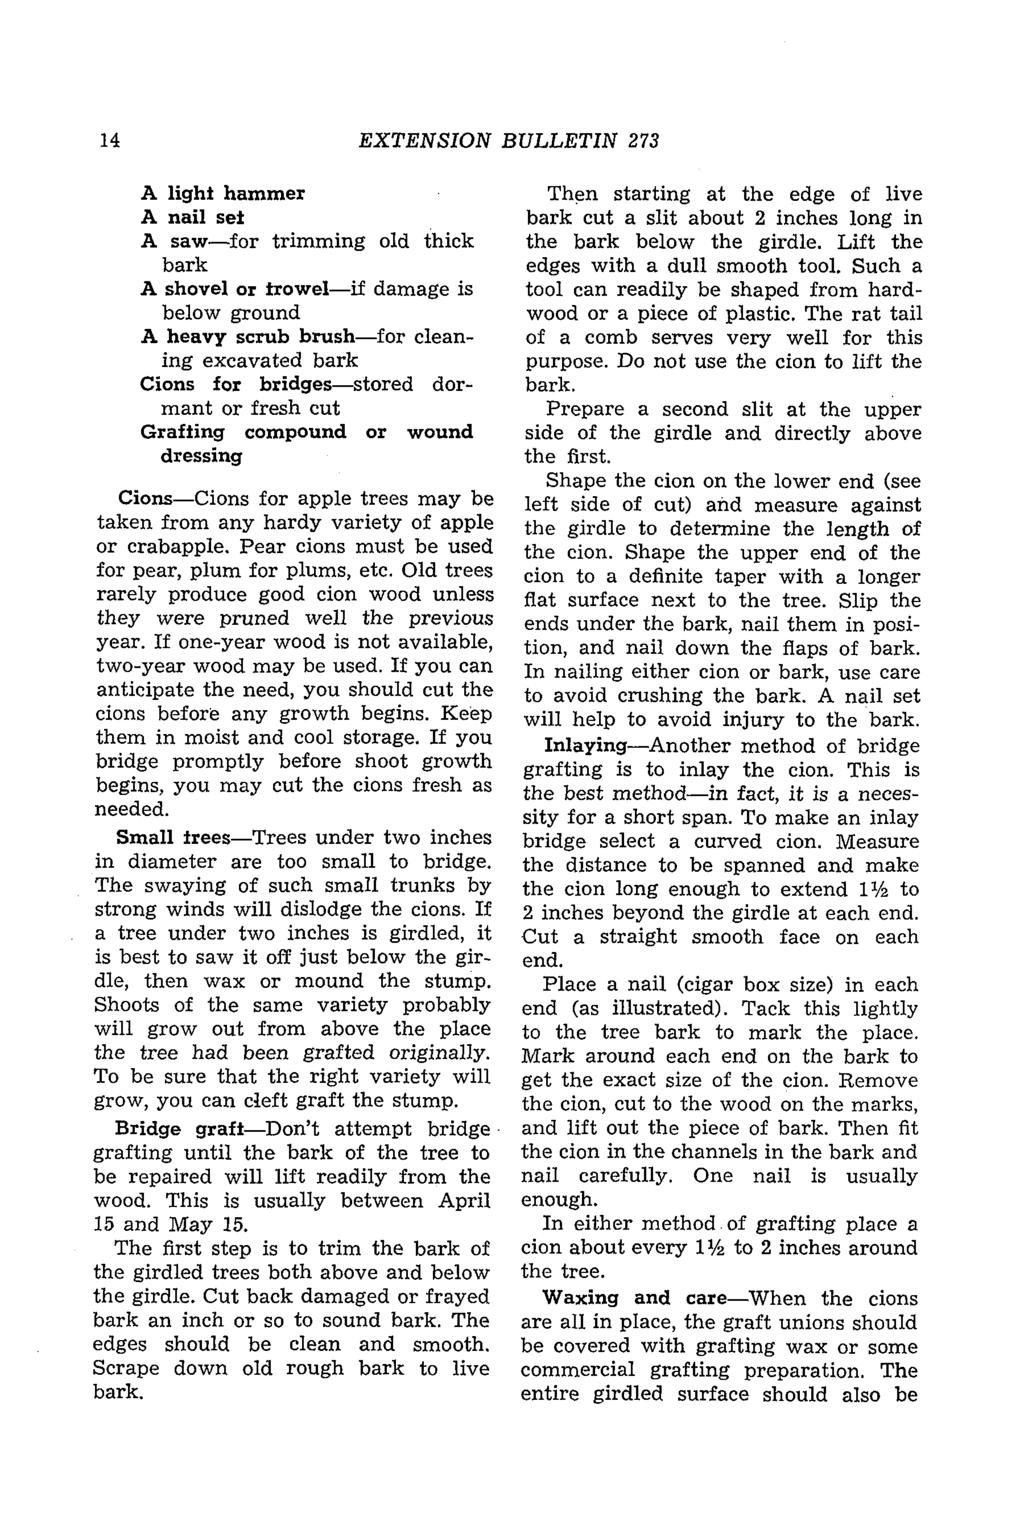 14 EXTENSION BULLETIN 273 A light hammer A nail set A saw-for trimming old thick bark A shovel or trowel-if damage is below ground A heavy scrub brush-for cleaning excavated bark Cions for